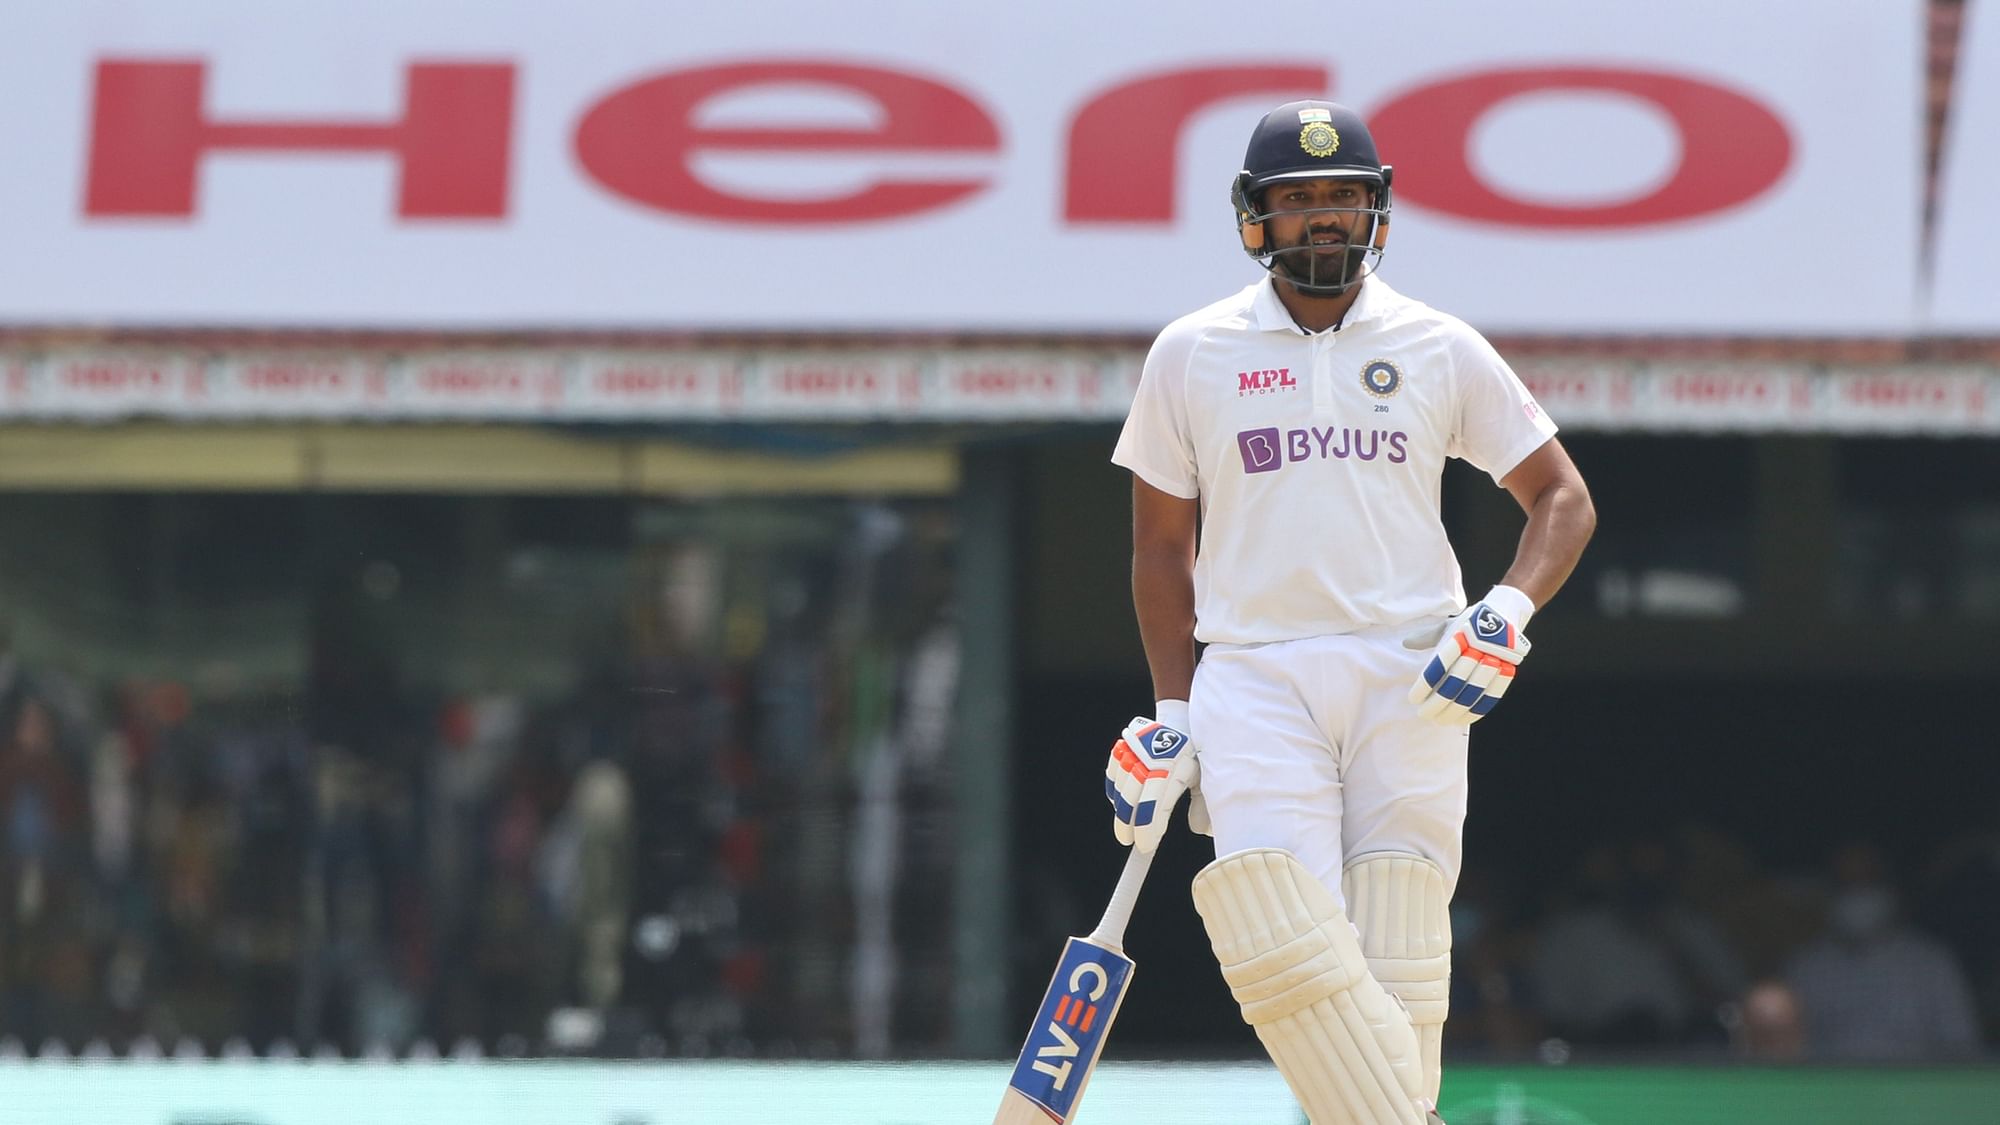 Rohit Sharma scored a century on Day 1 against England in Chennai